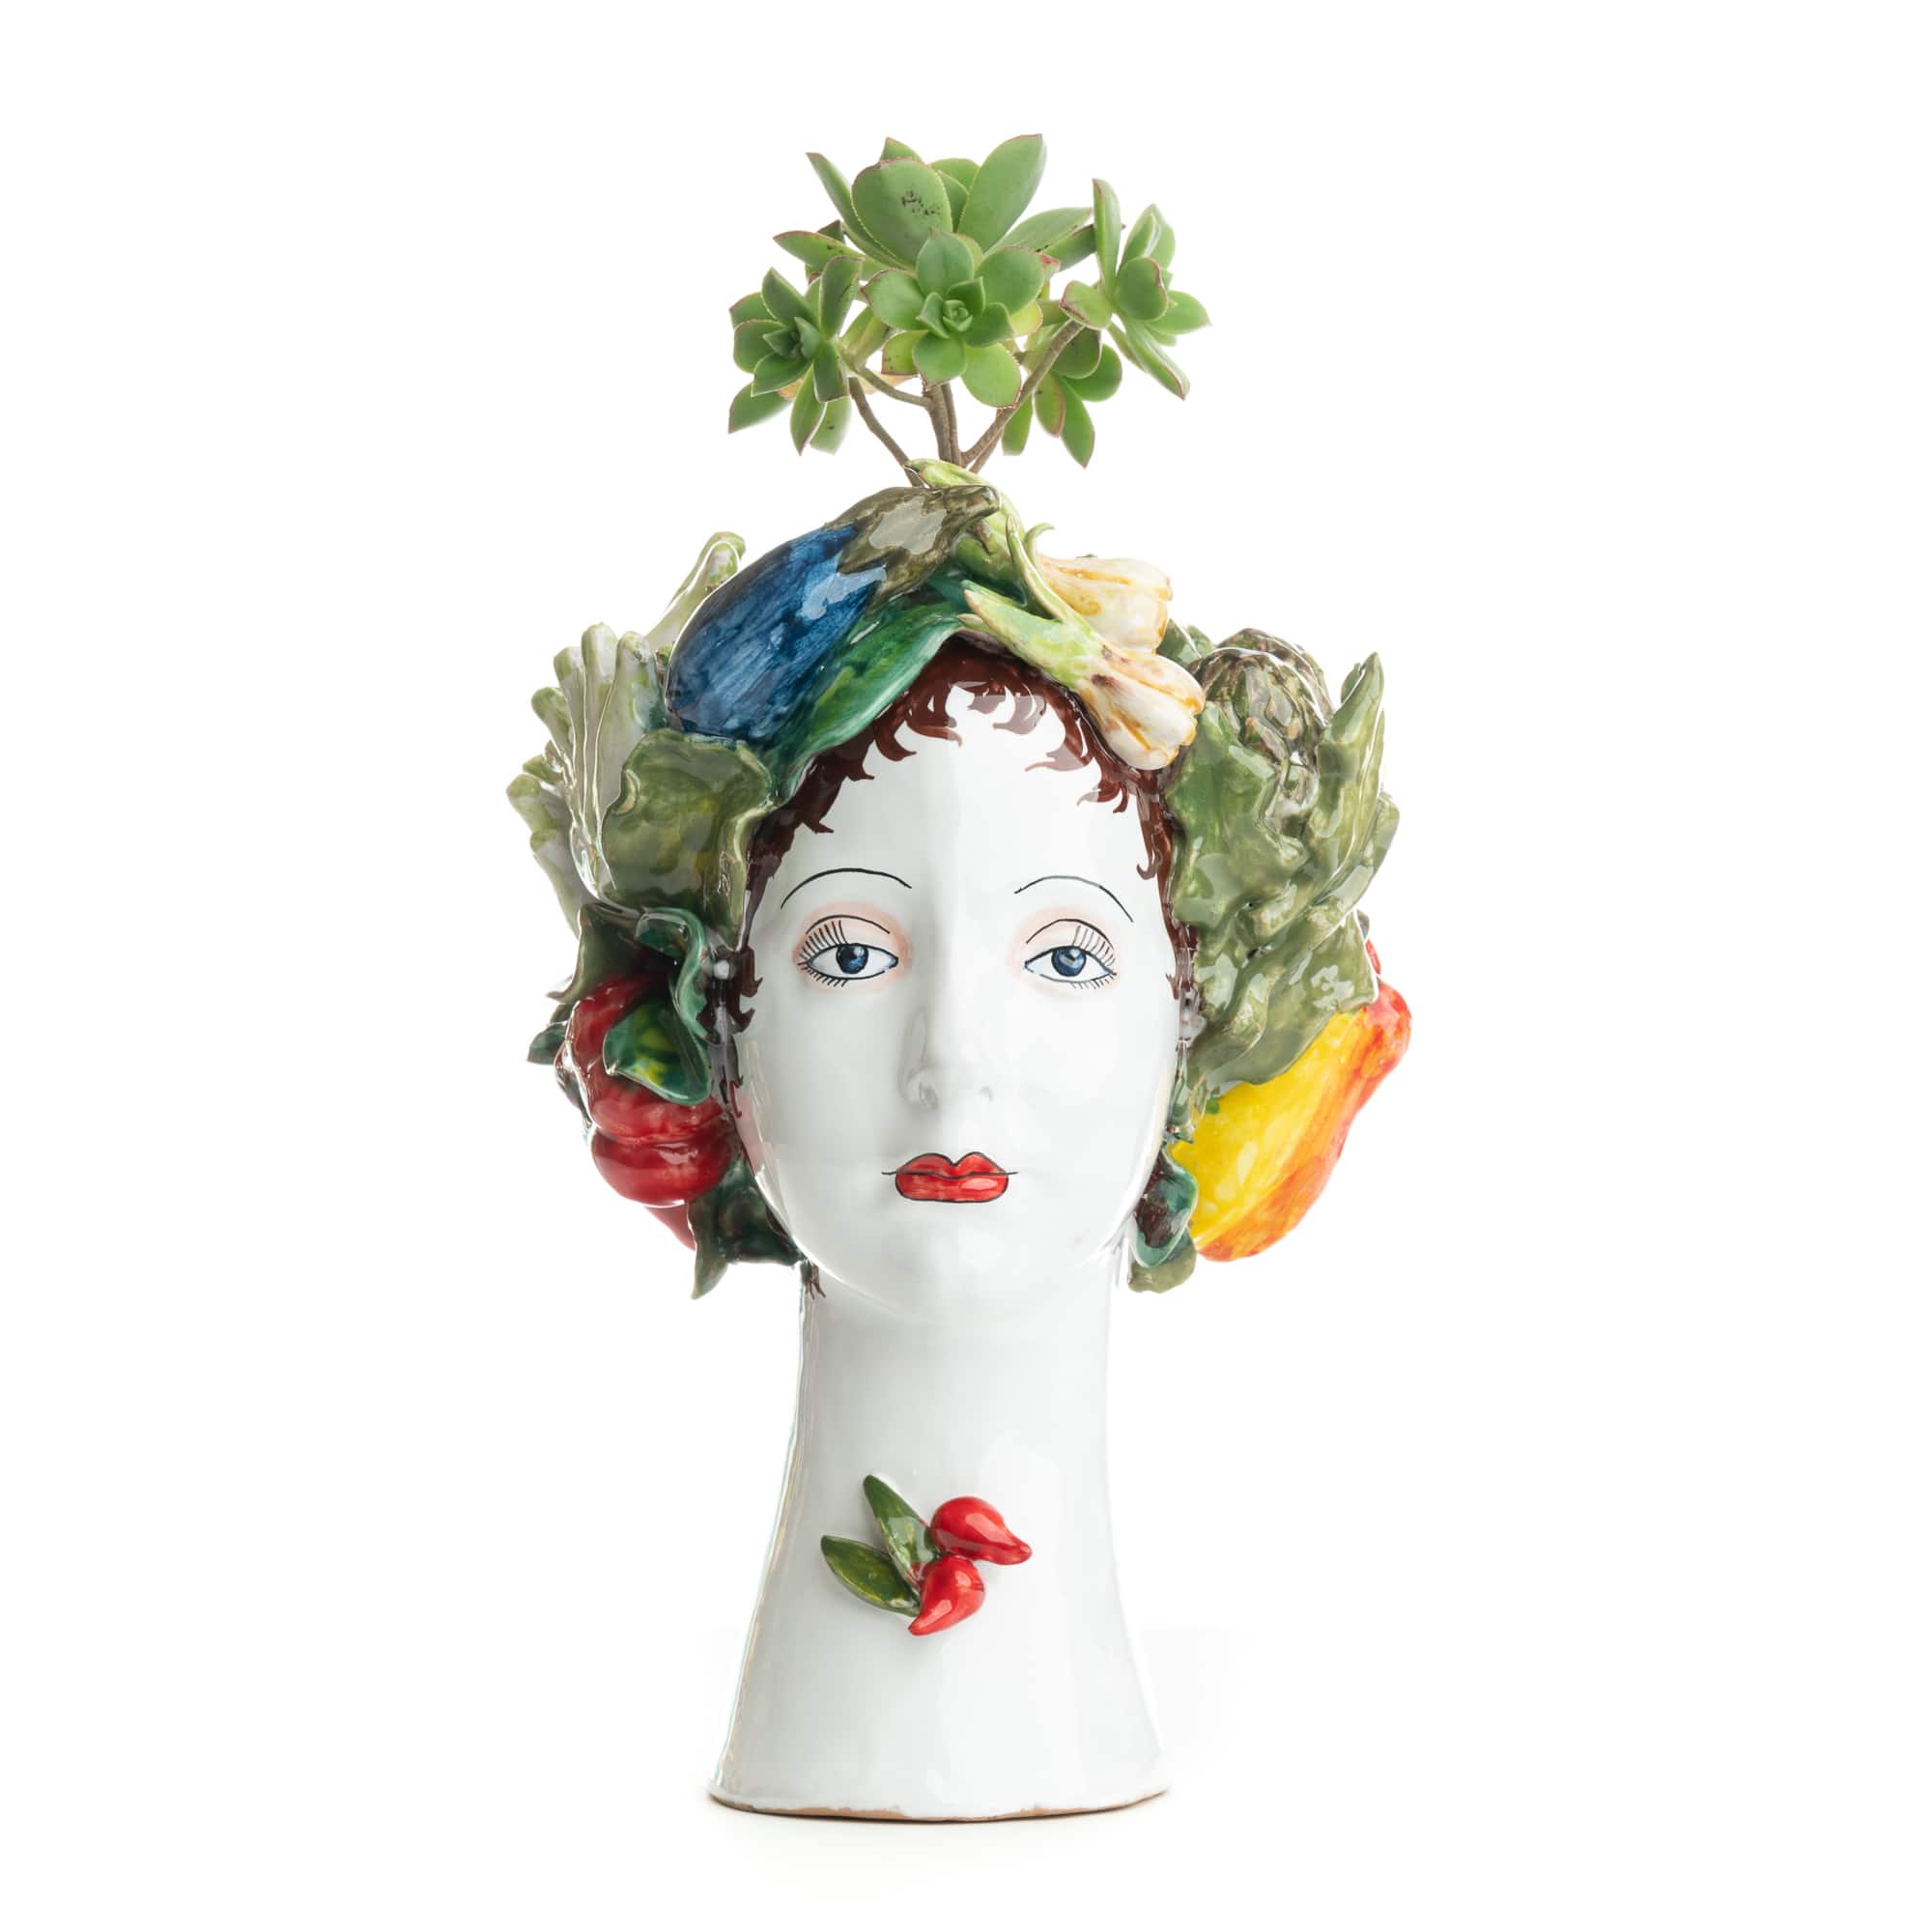 Ceramiche D'arte Dolfi Sculpture with Vegetables, ceramics, pottery, italian design, majolica, handmade, handcrafted, handpainted, home decor, kitchen art, home goods, deruta, majolica, Artisan, treasures, traditional art, modern art, gift ideas, style, SF, shop small business, artists, shop online, landmark store, legacy, one of a kind, limited edition, gift guide, gift shop, retail shop, decorations, shopping, italy, home staging, home decorating, home interiors